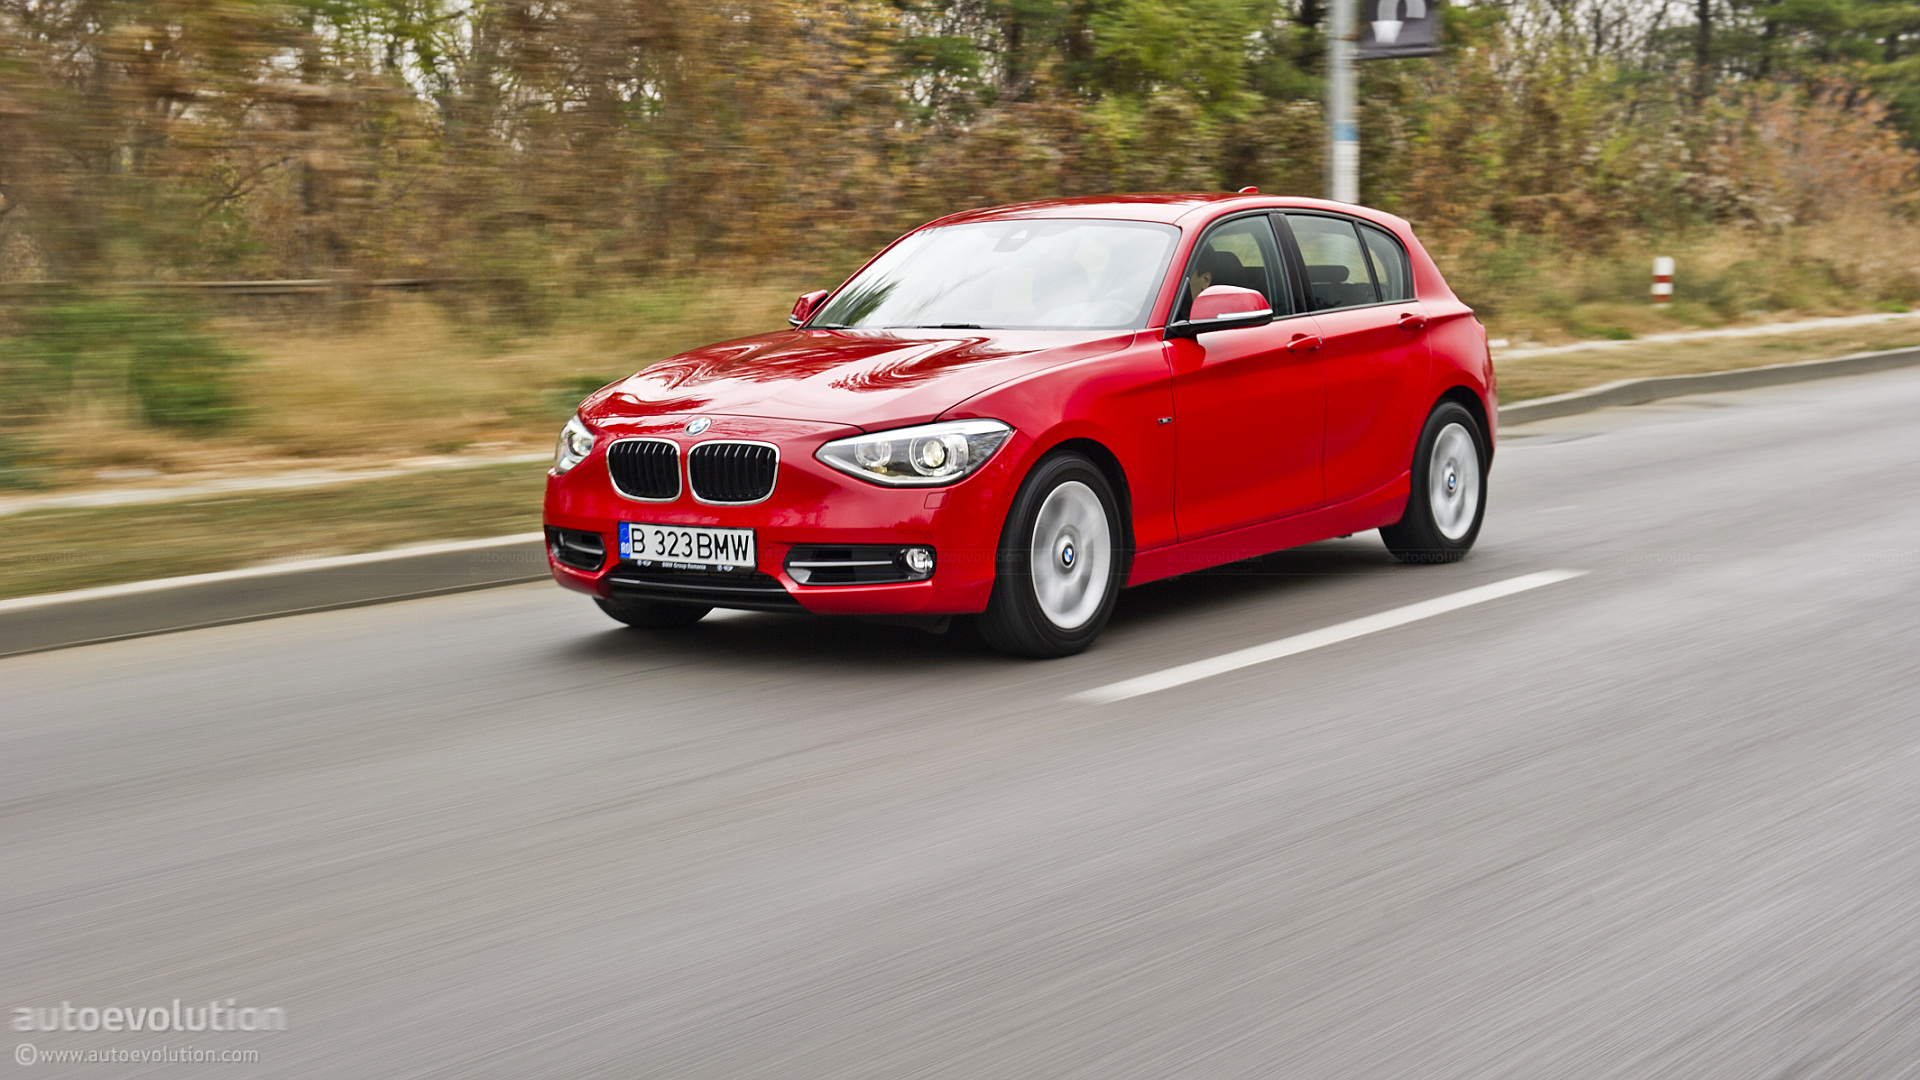 BMW F20 120d 18,000 Miles Review by Bimmerfile - autoevolution